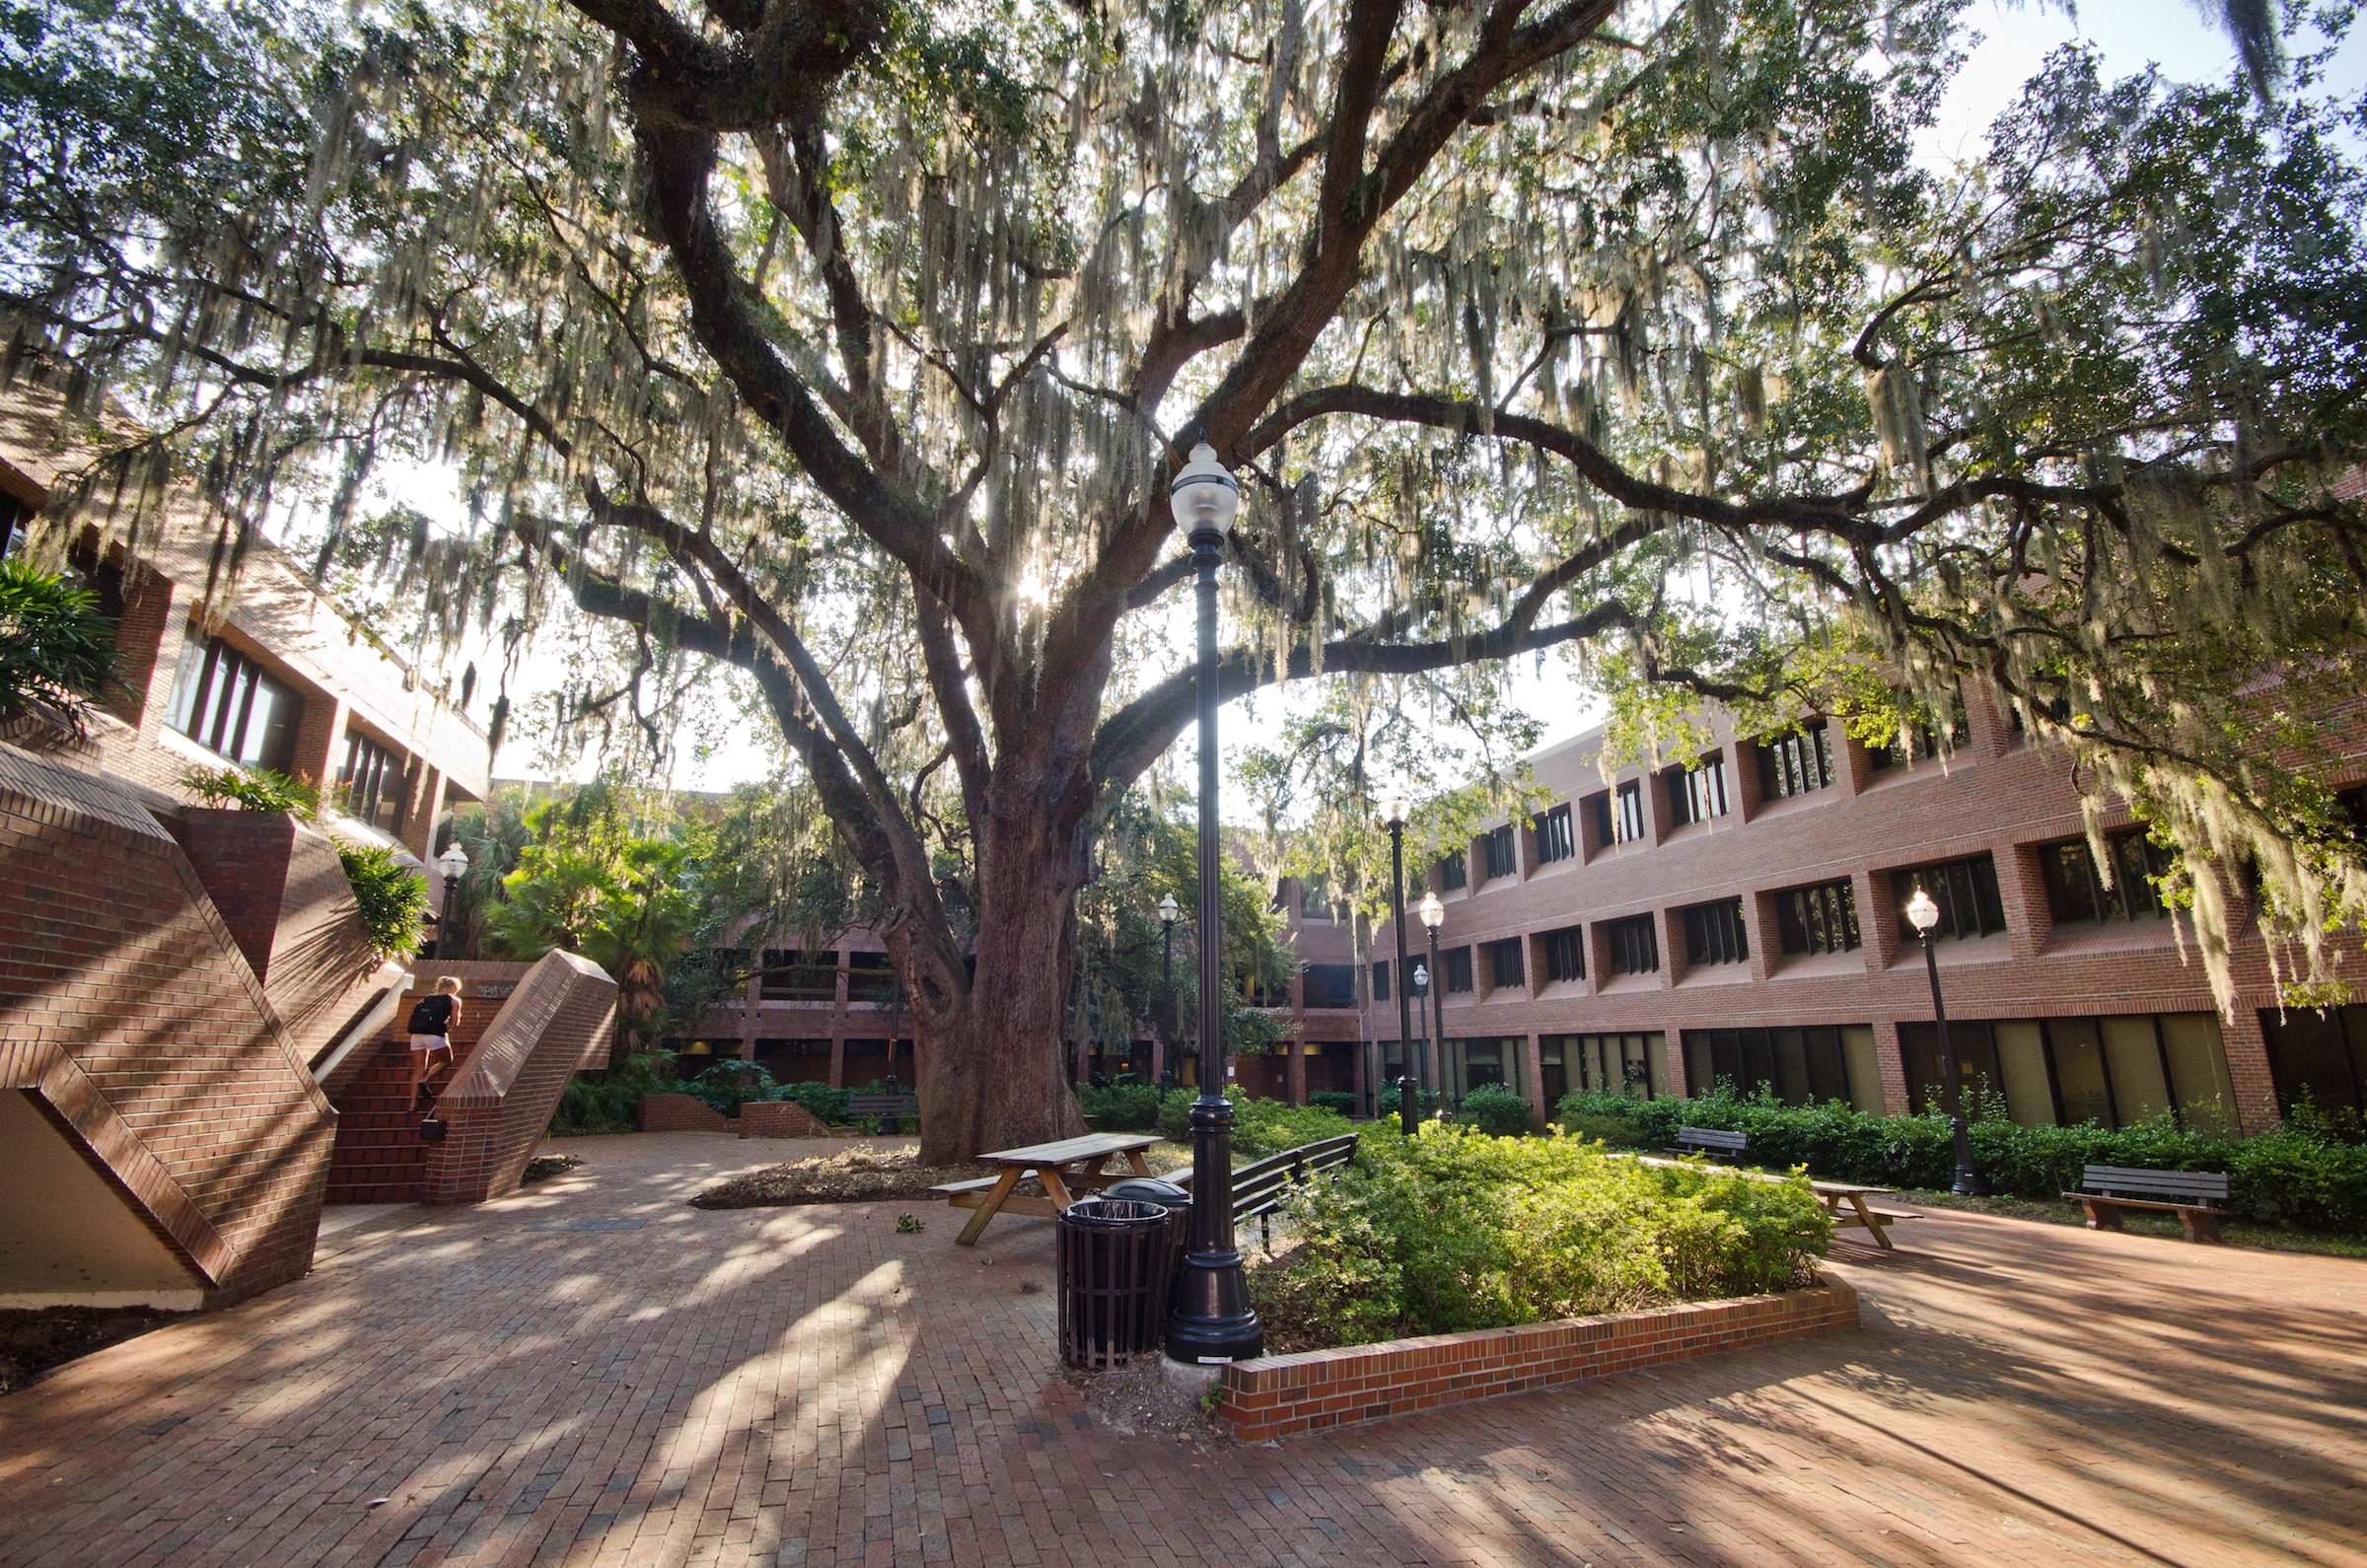 A large oak in the central courtyard at the College of Education.